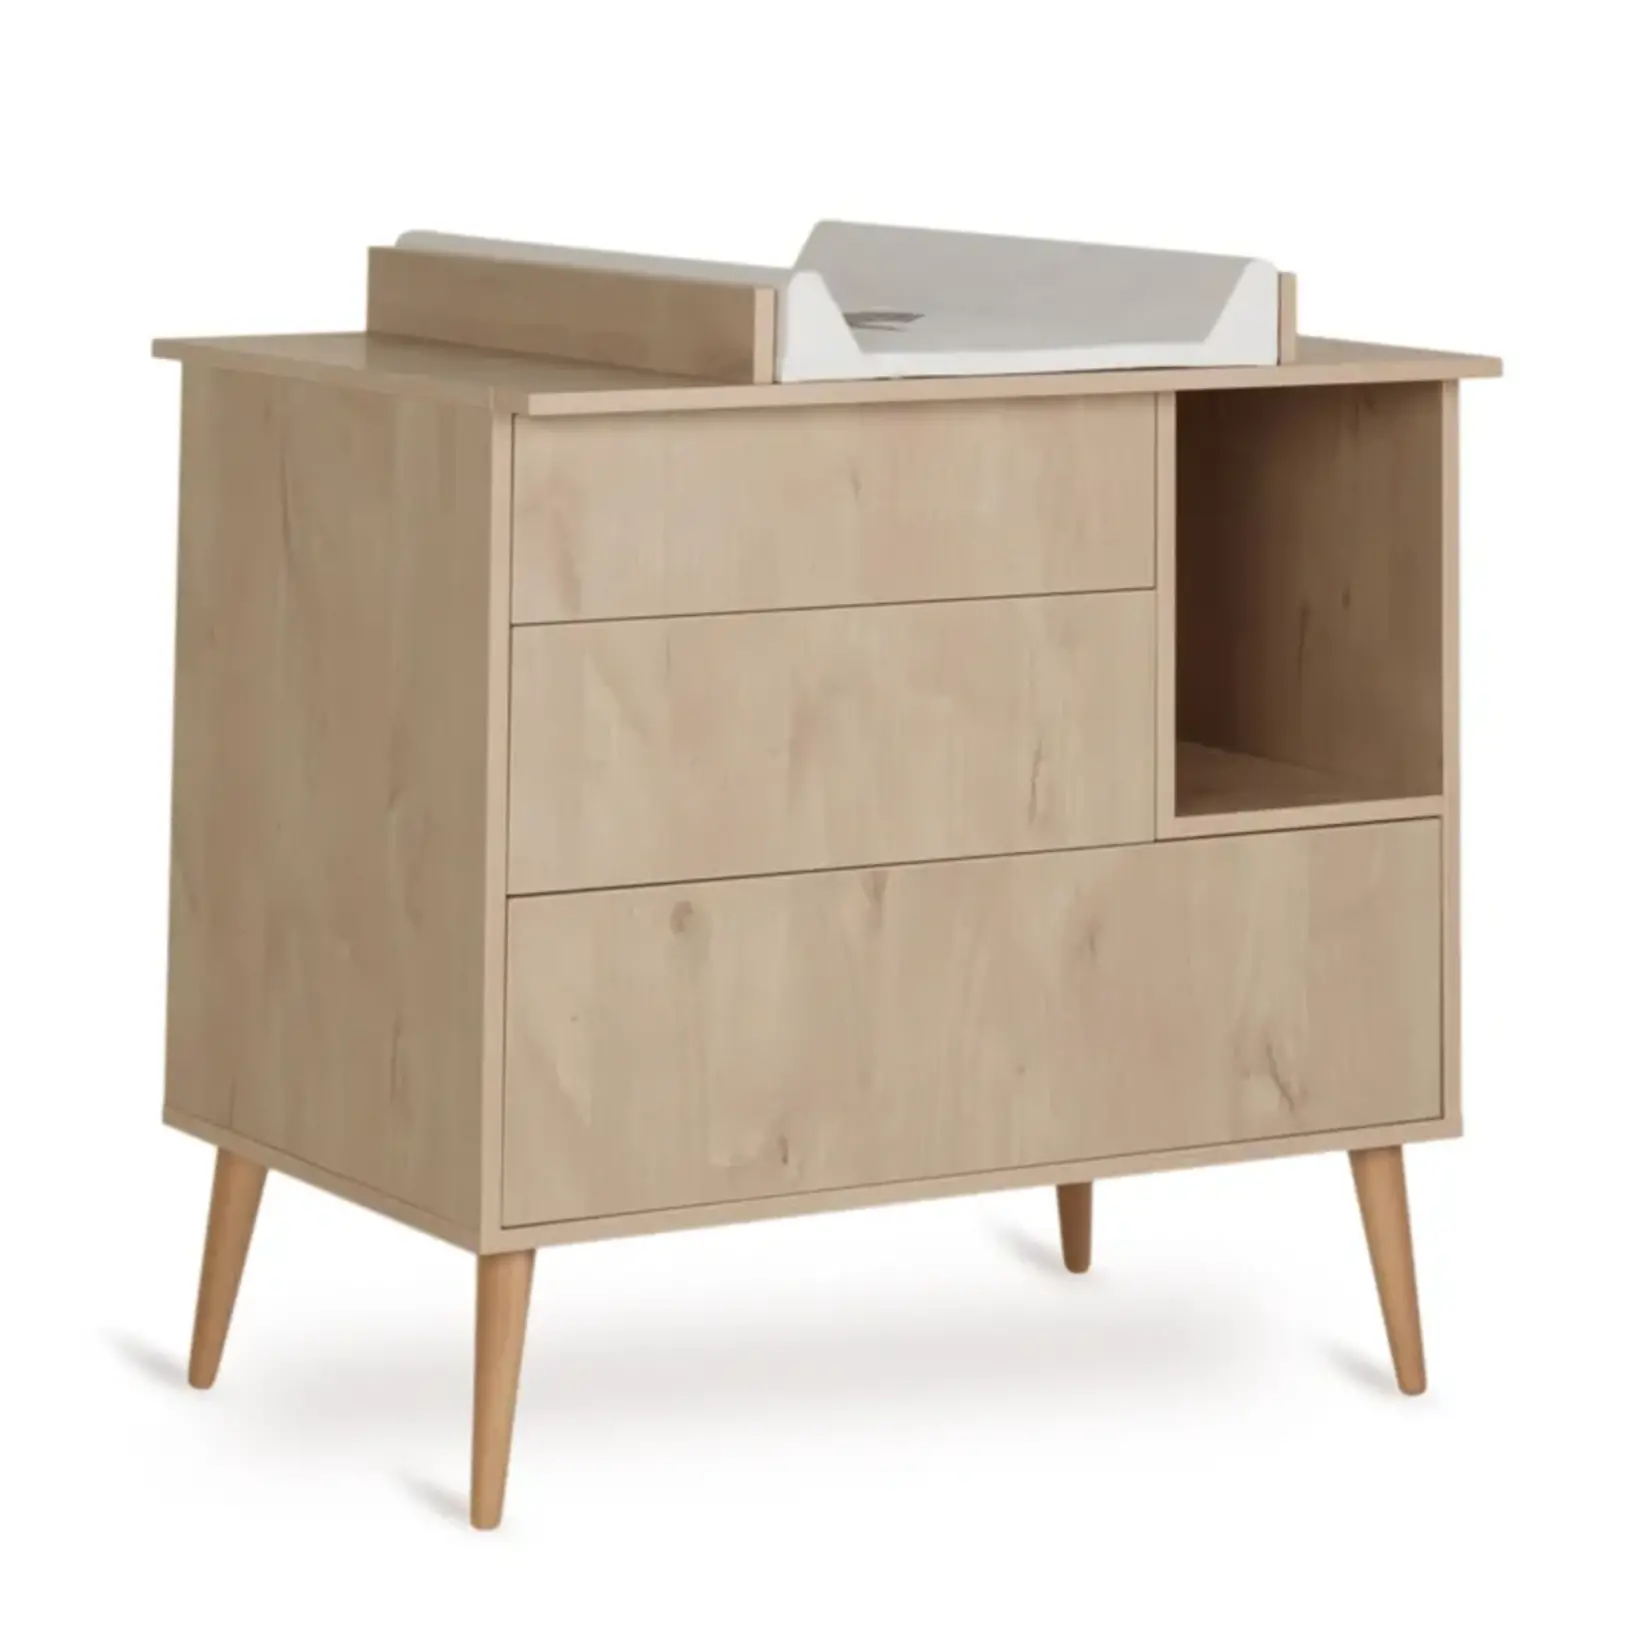 Quax Cocoon extension commode cocoon natural oak